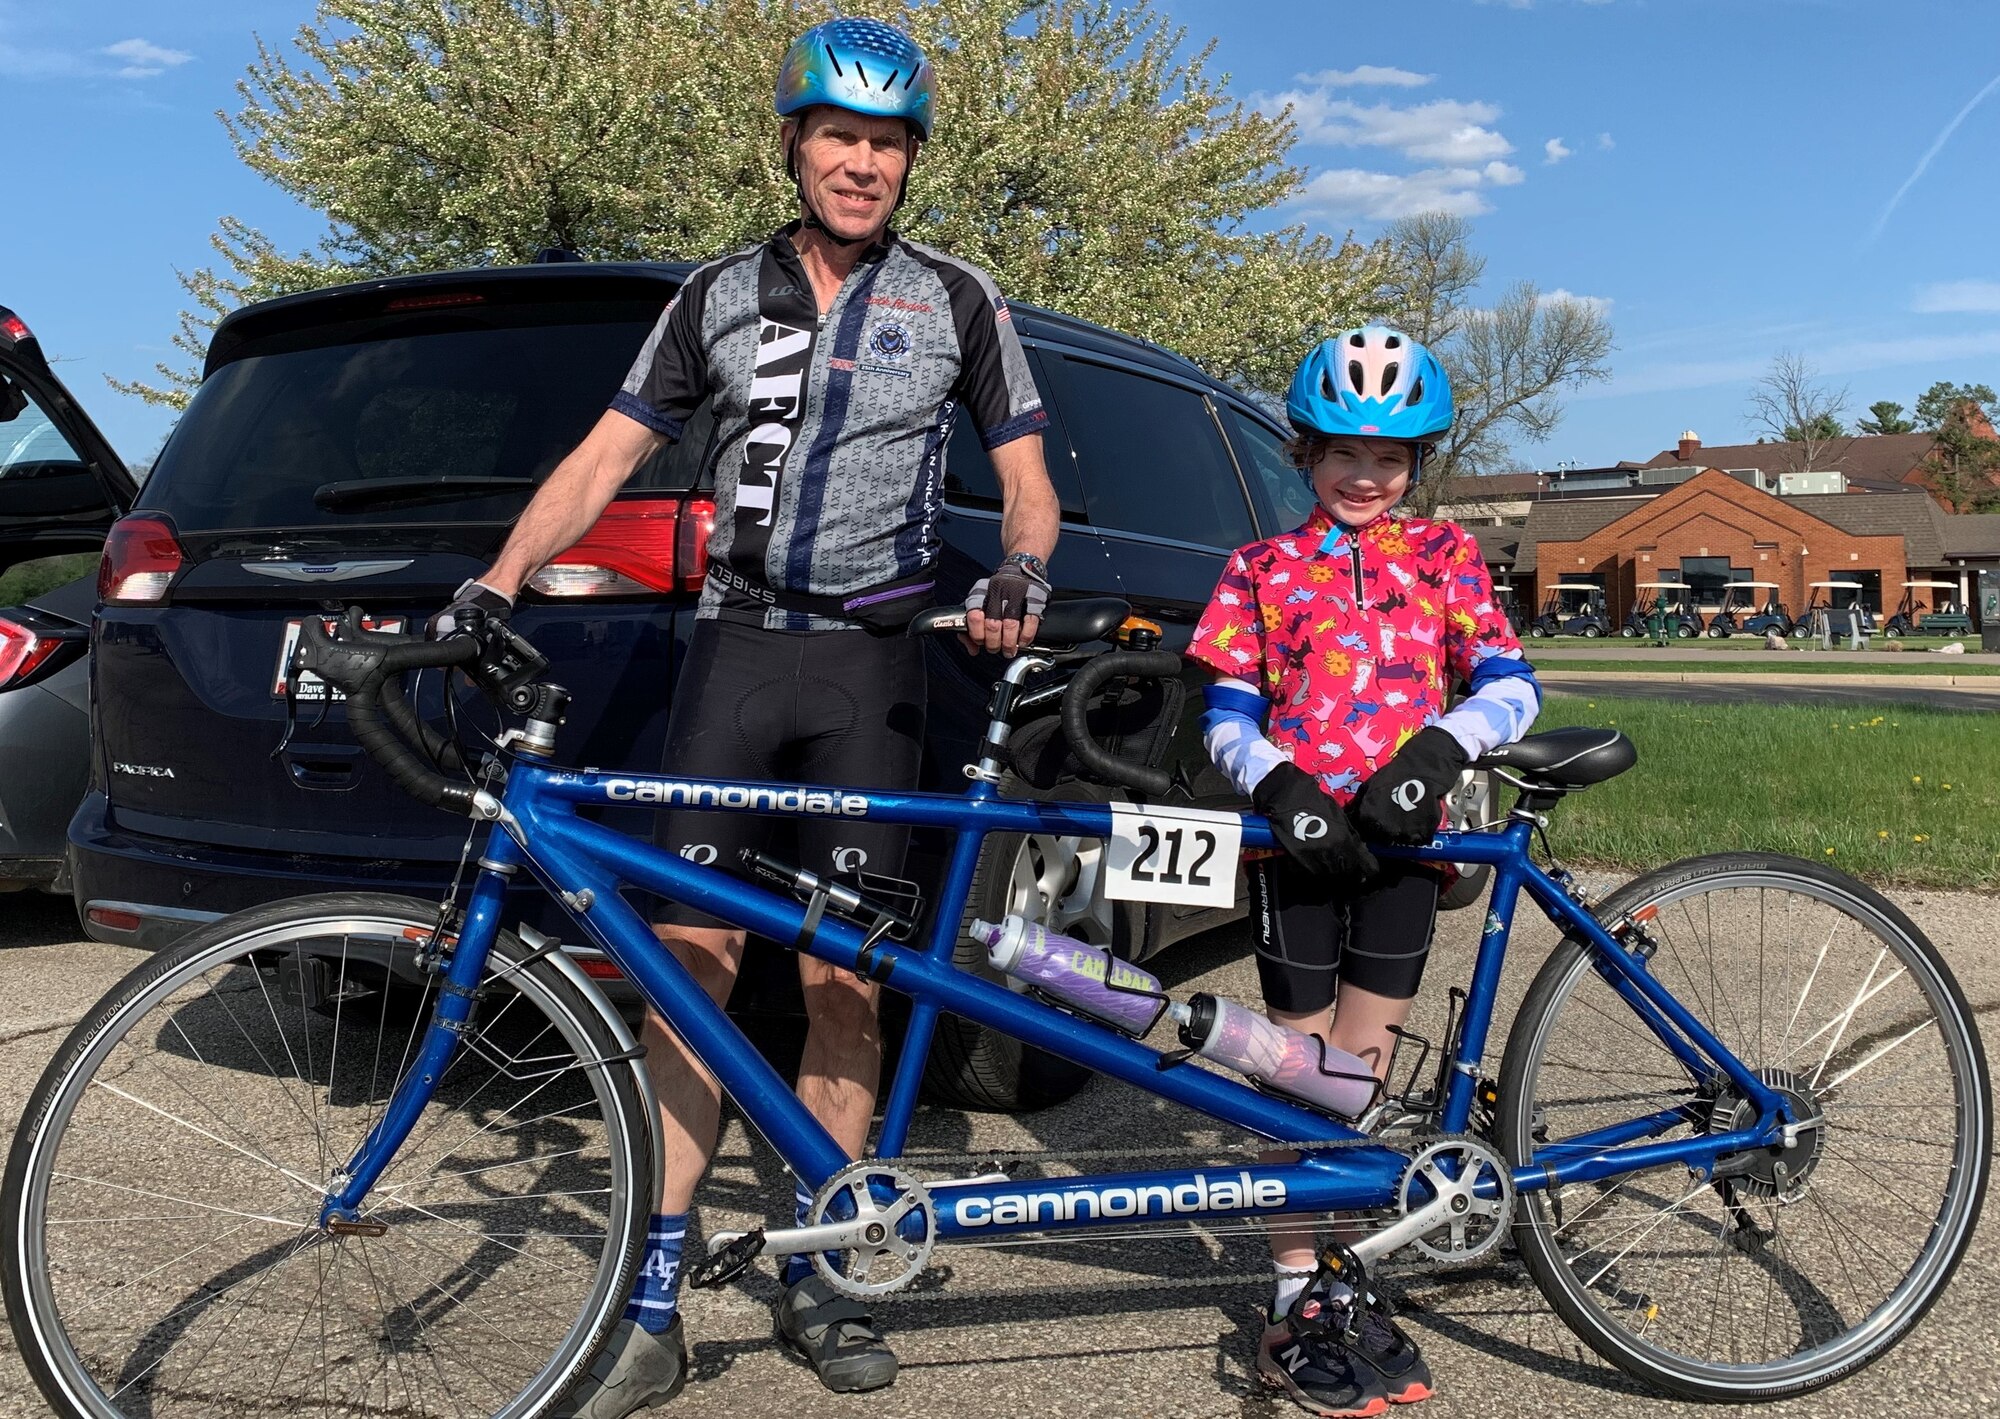 The youngest Blue Streak rider in the season opener April 13 was 7-year-old Etta Hudson of Tipp City. Etta was the stoker on a tandem bicycle behind her grandfather, Lt. Gen. (Ret.) Jack Hudson. (Contributed photo)